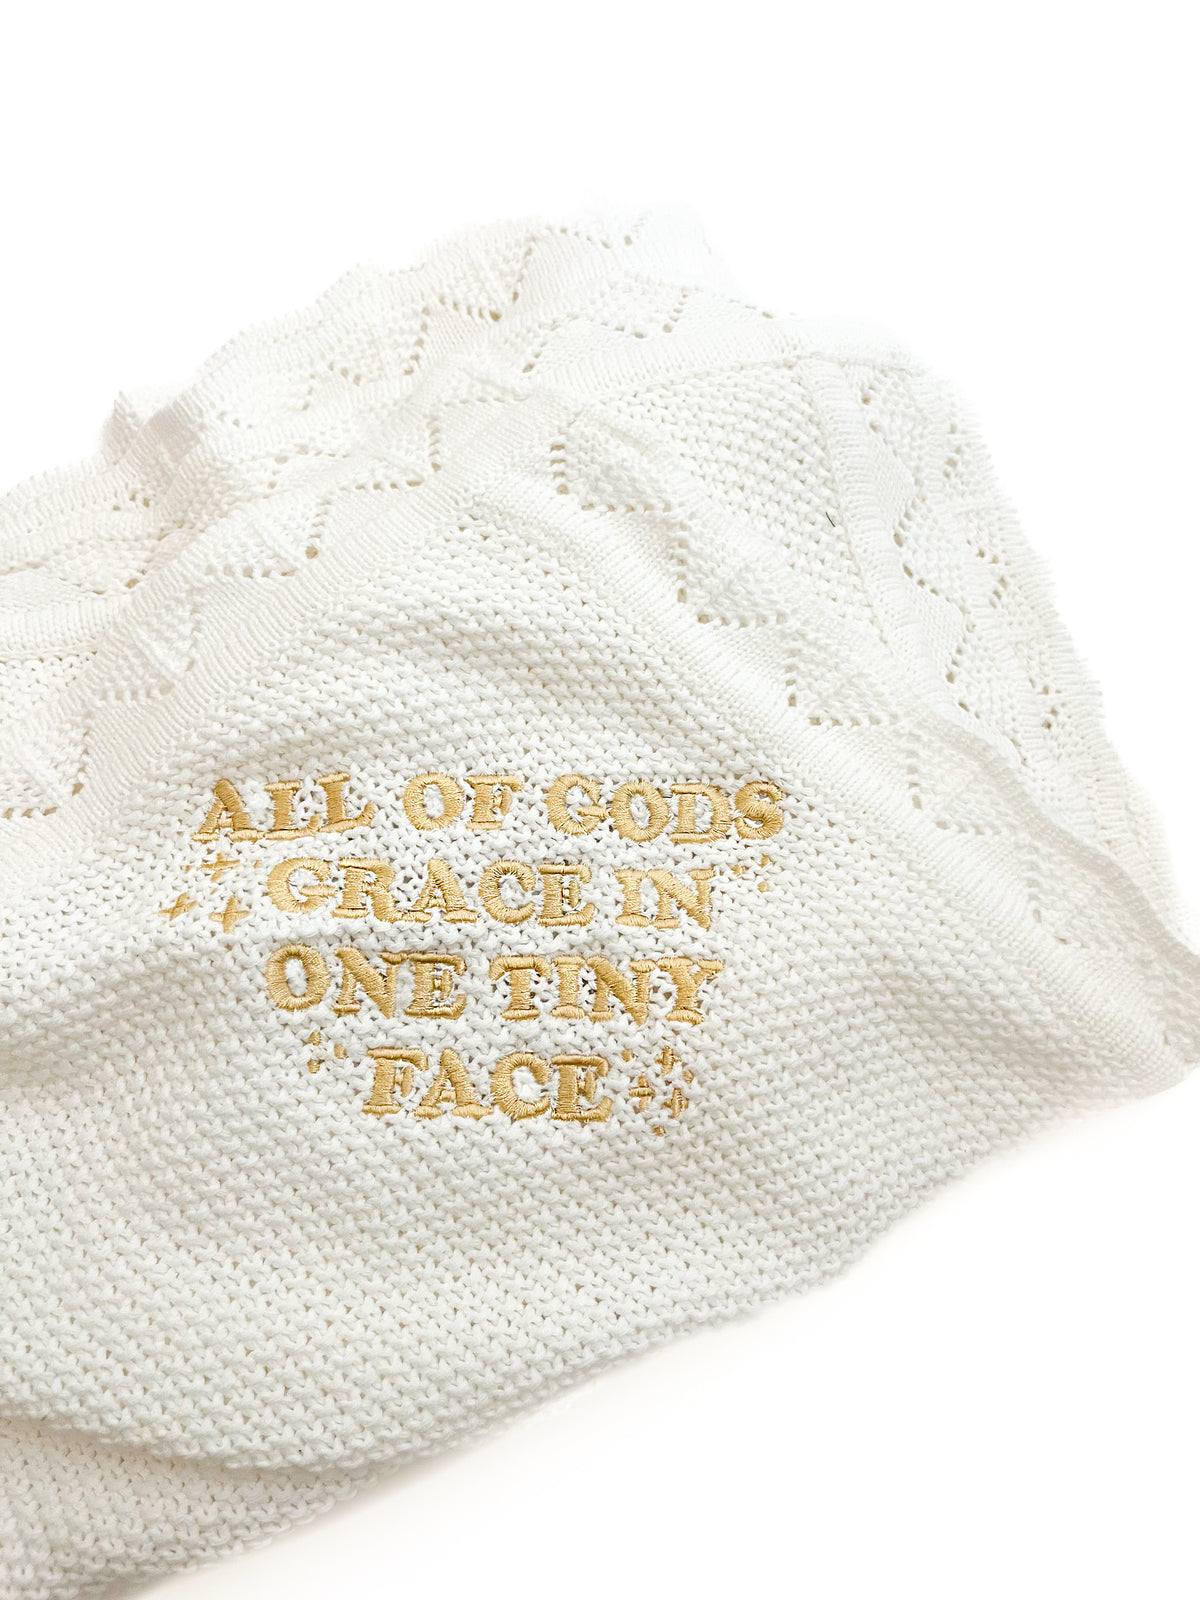 All of Gods Grace in One Tiny Face Knit Blanket